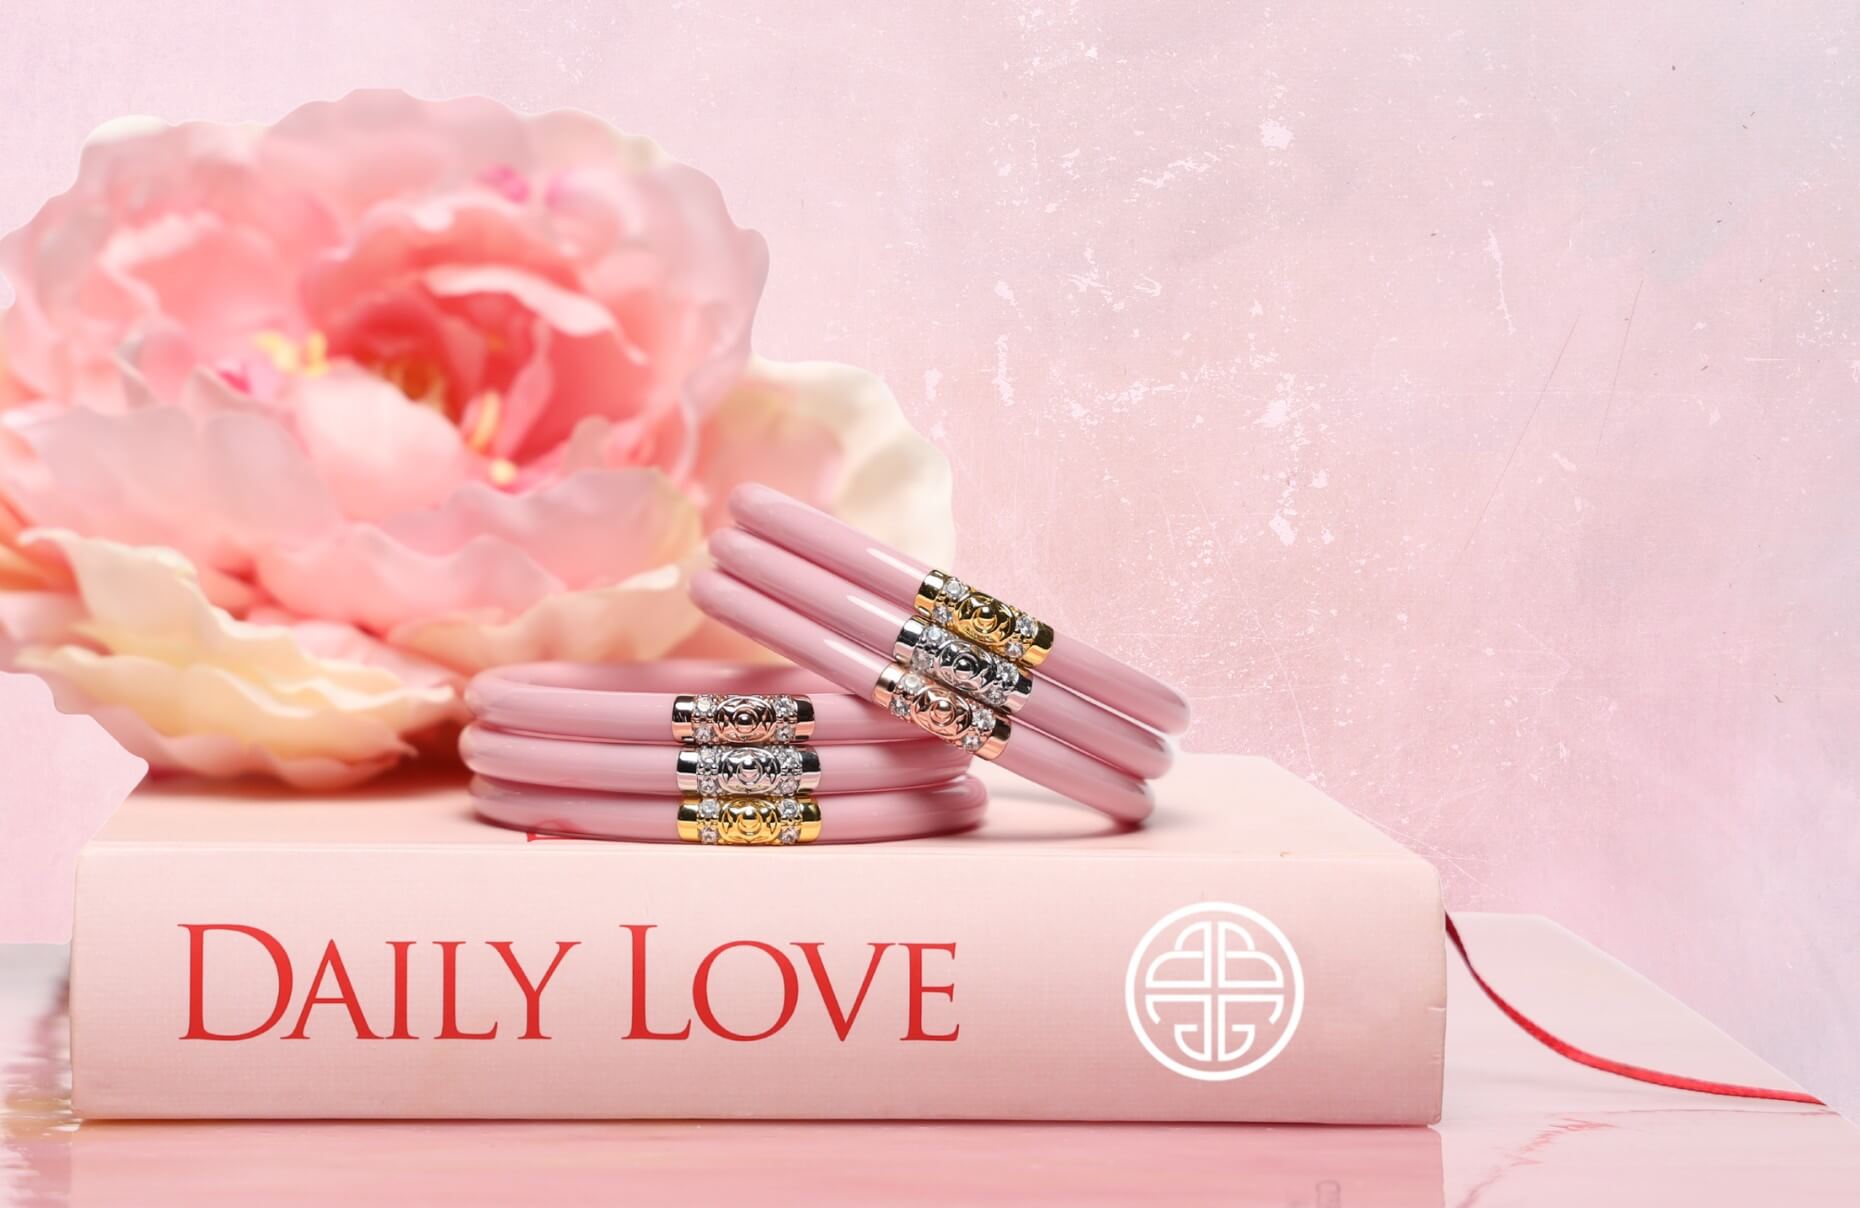 Pink Three Kings All Weather Bangles on Daily Love Book and Lotus Image | BuDhaGirl